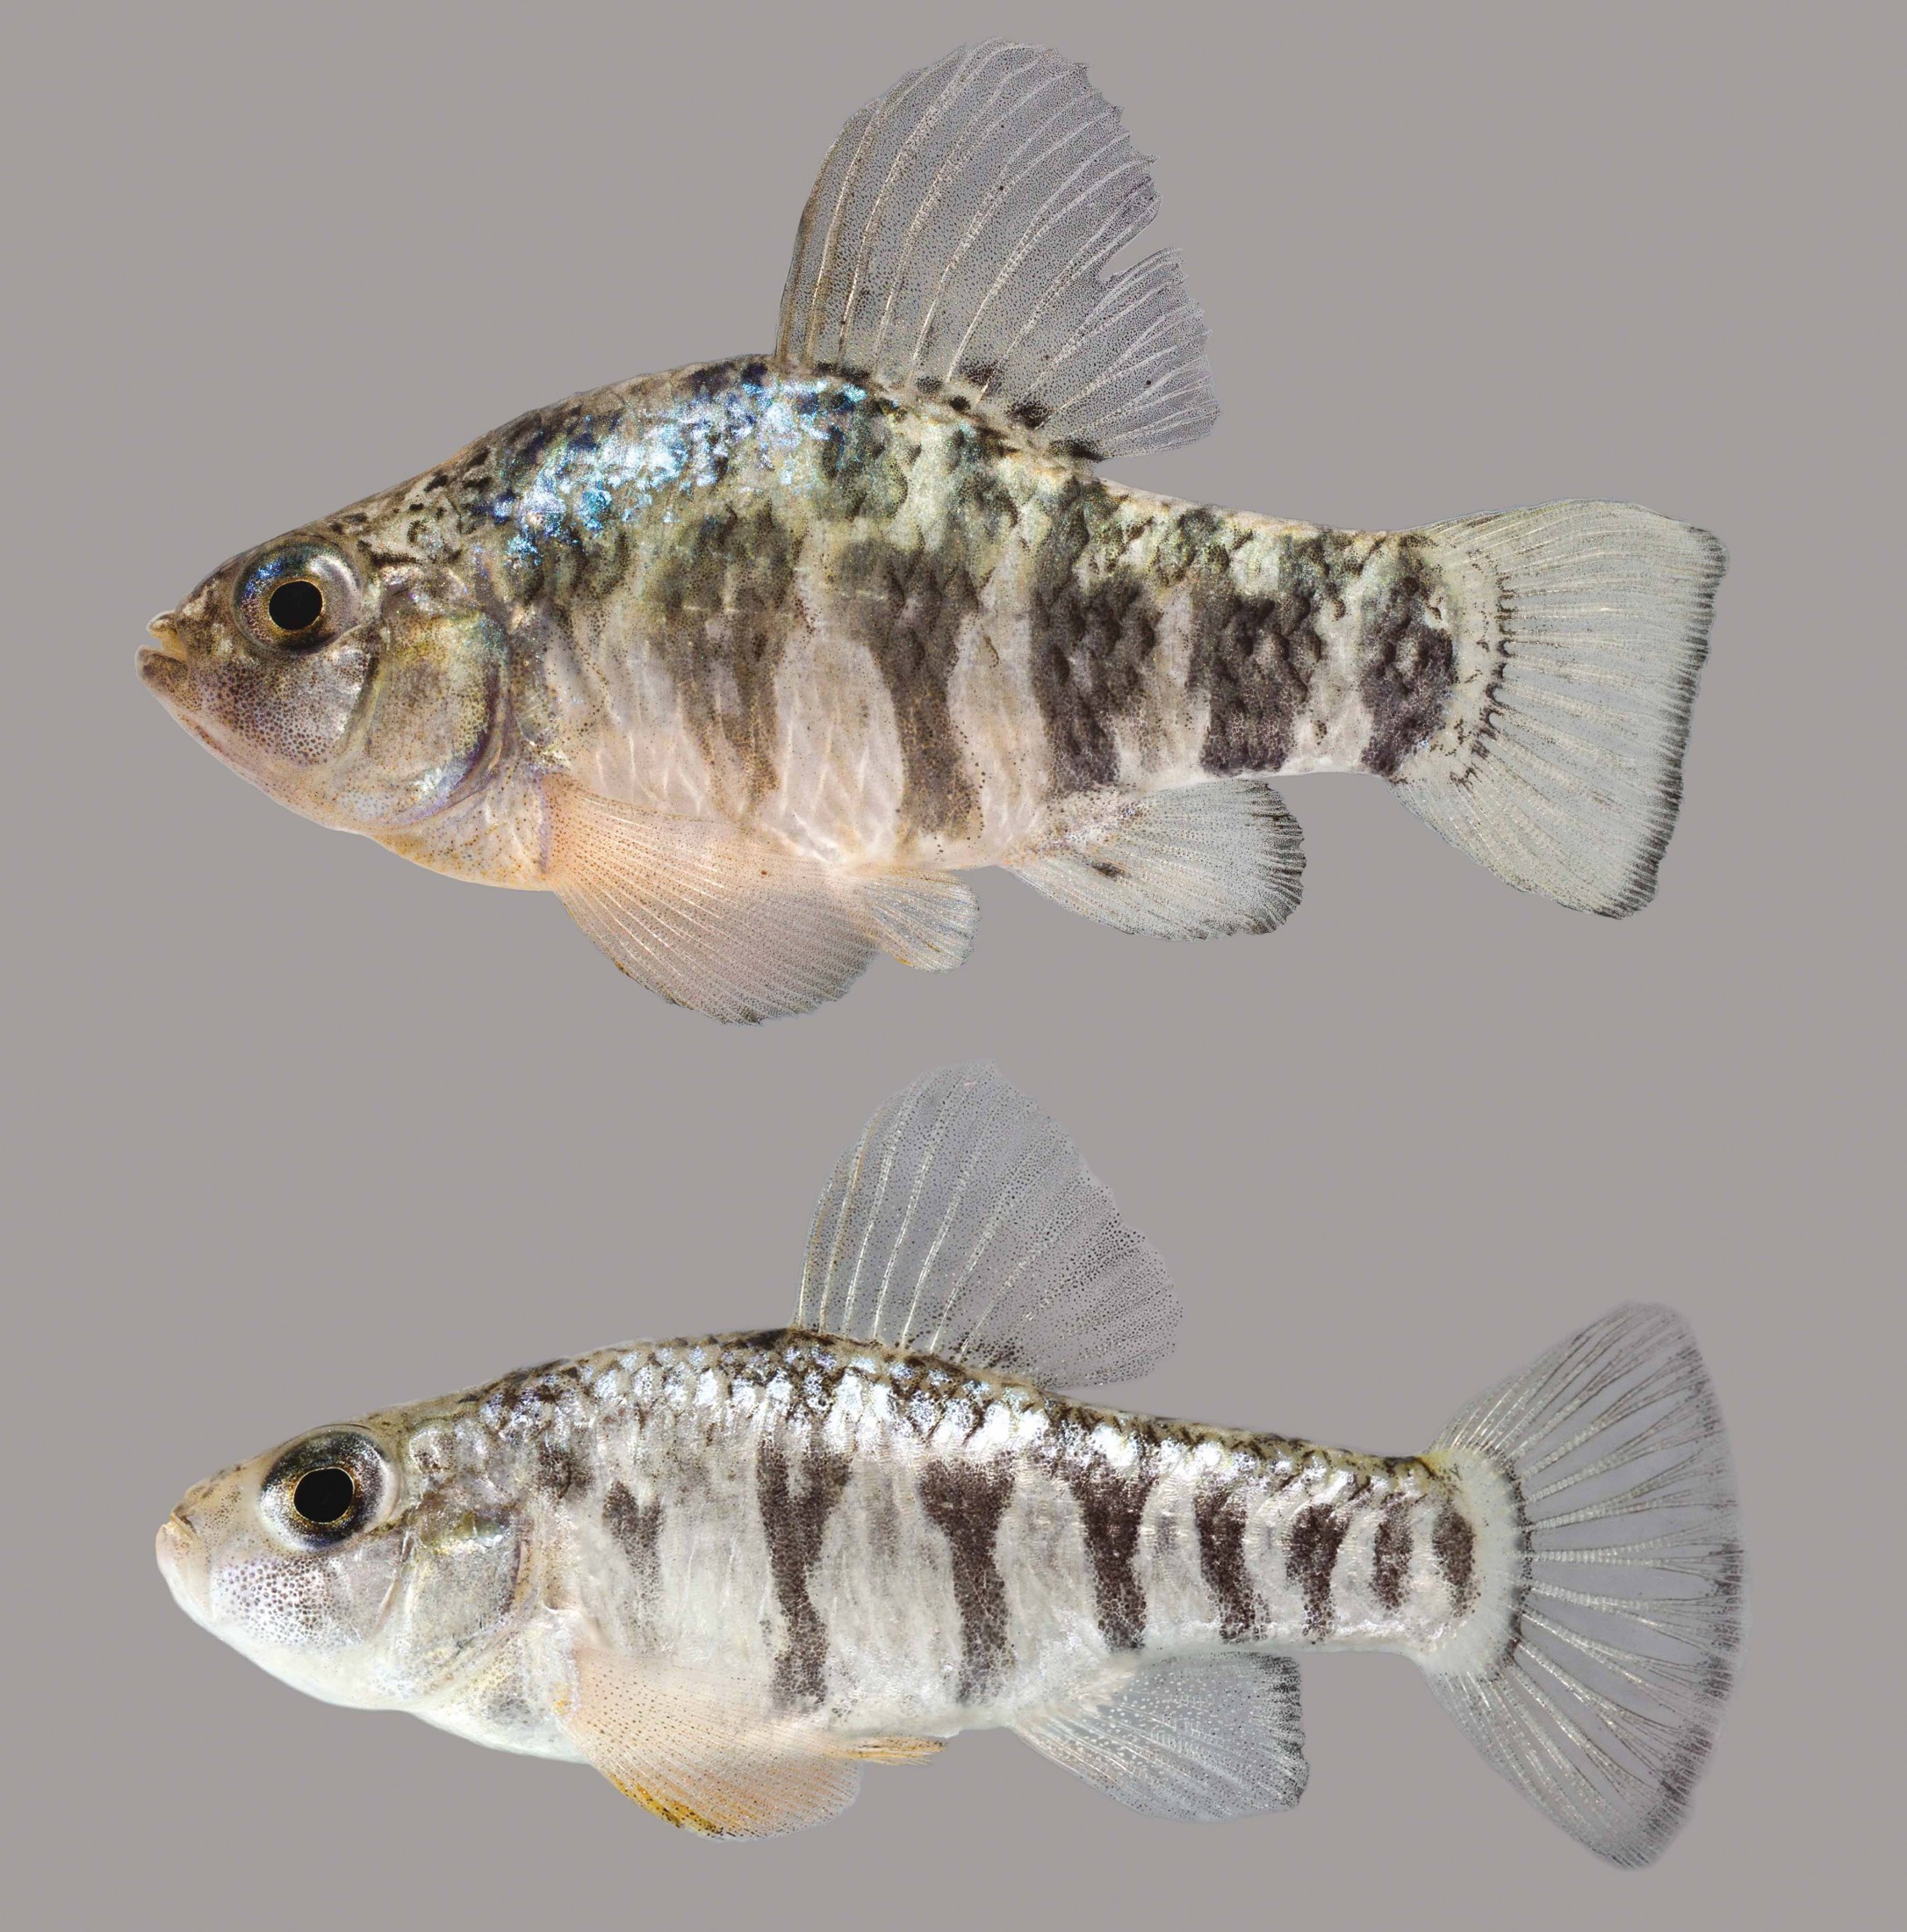 Sheepshead Minnow – Discover Fishes